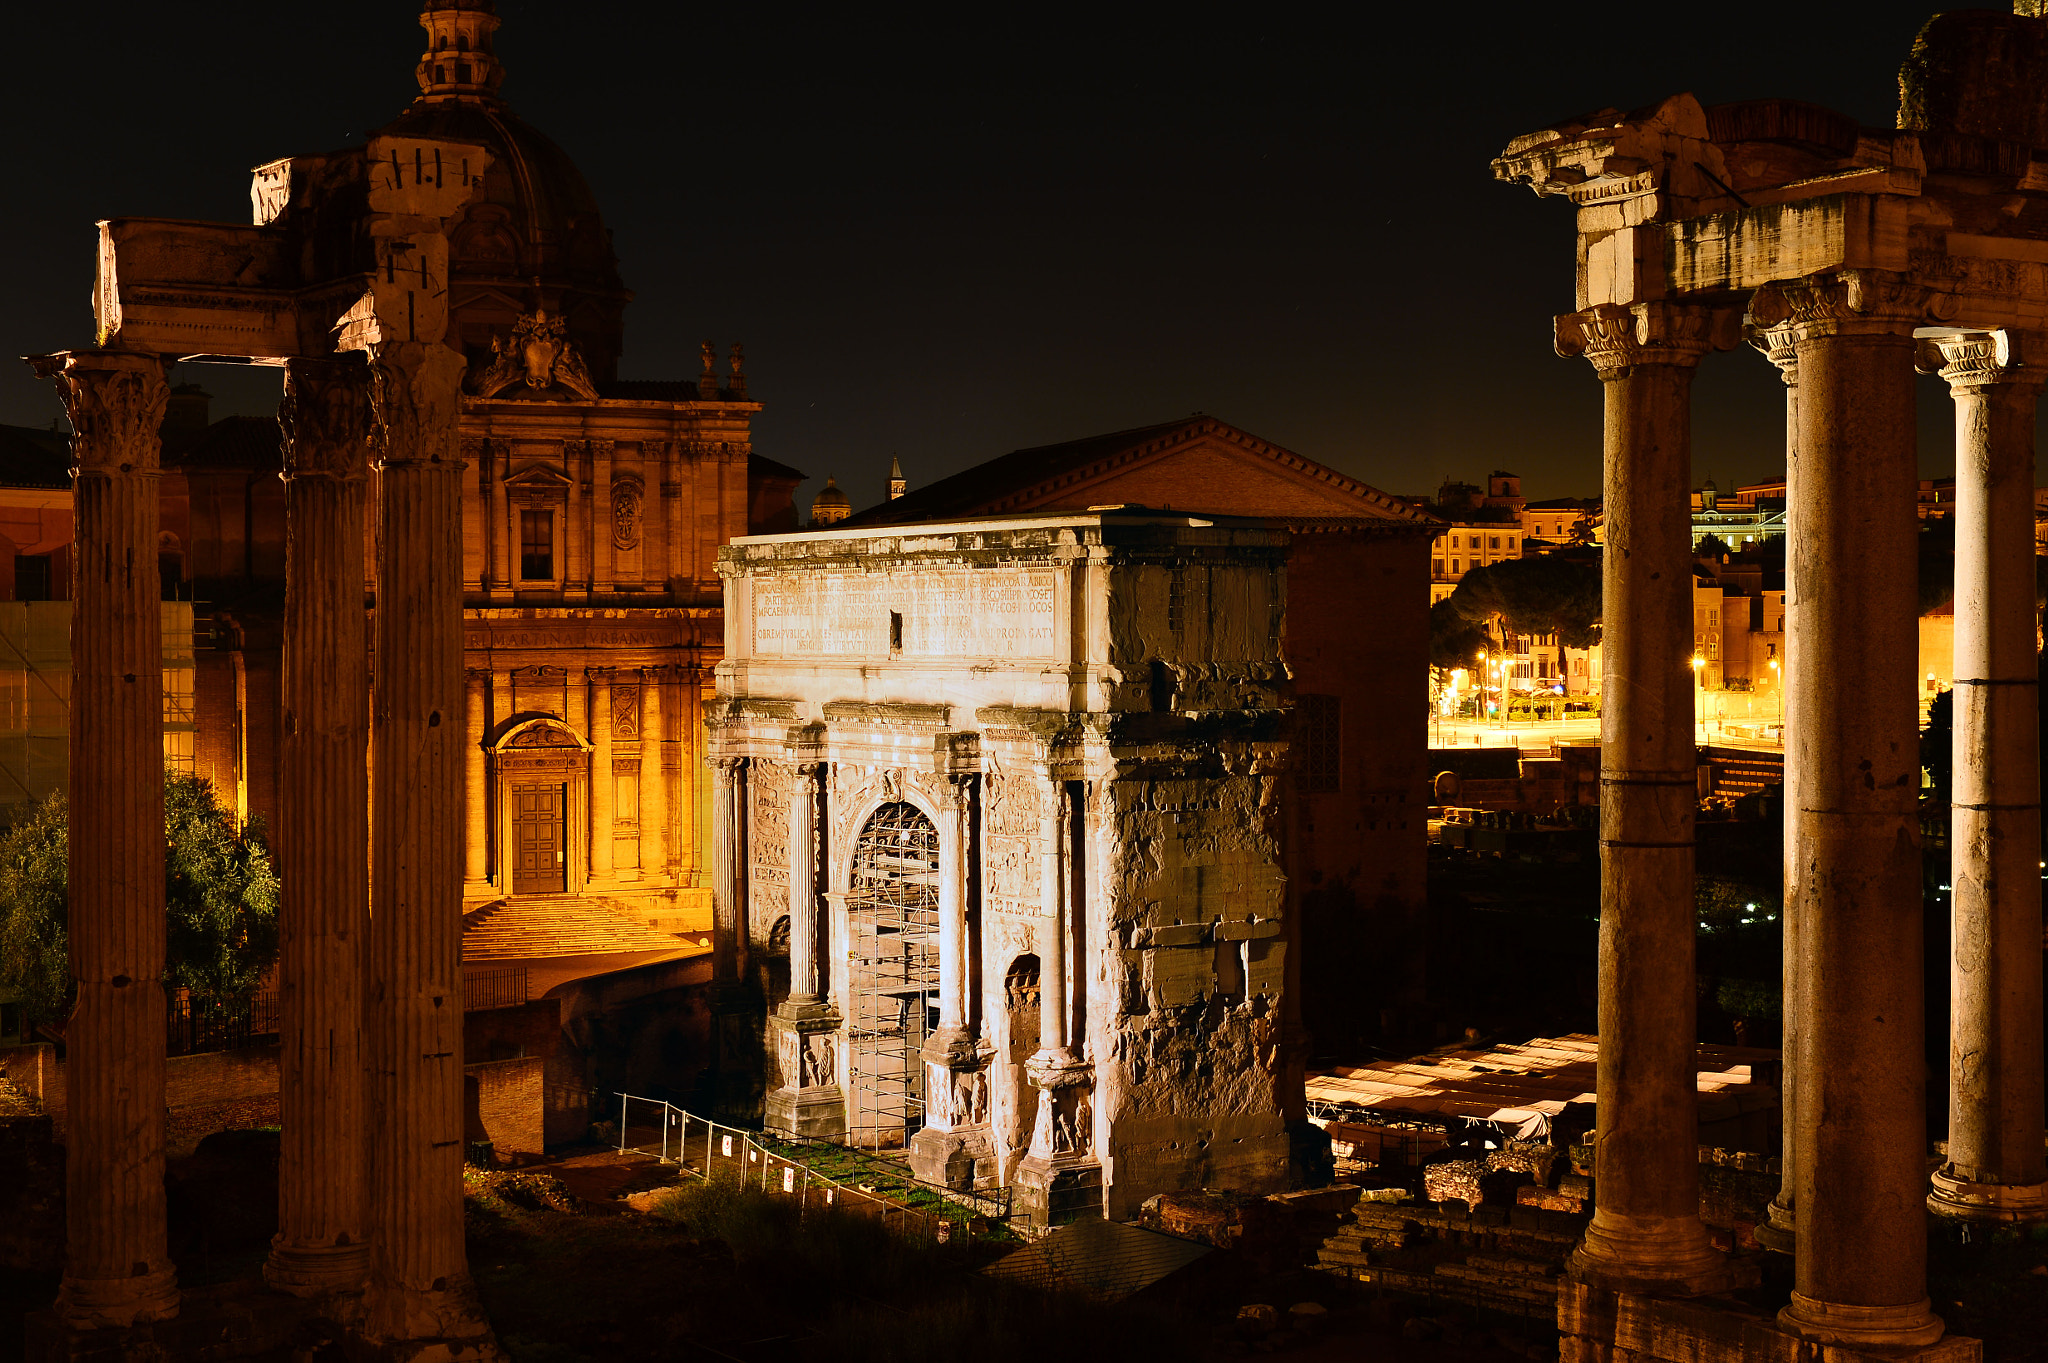 Treasures of an ancient empire. Rome - Imperial Forum